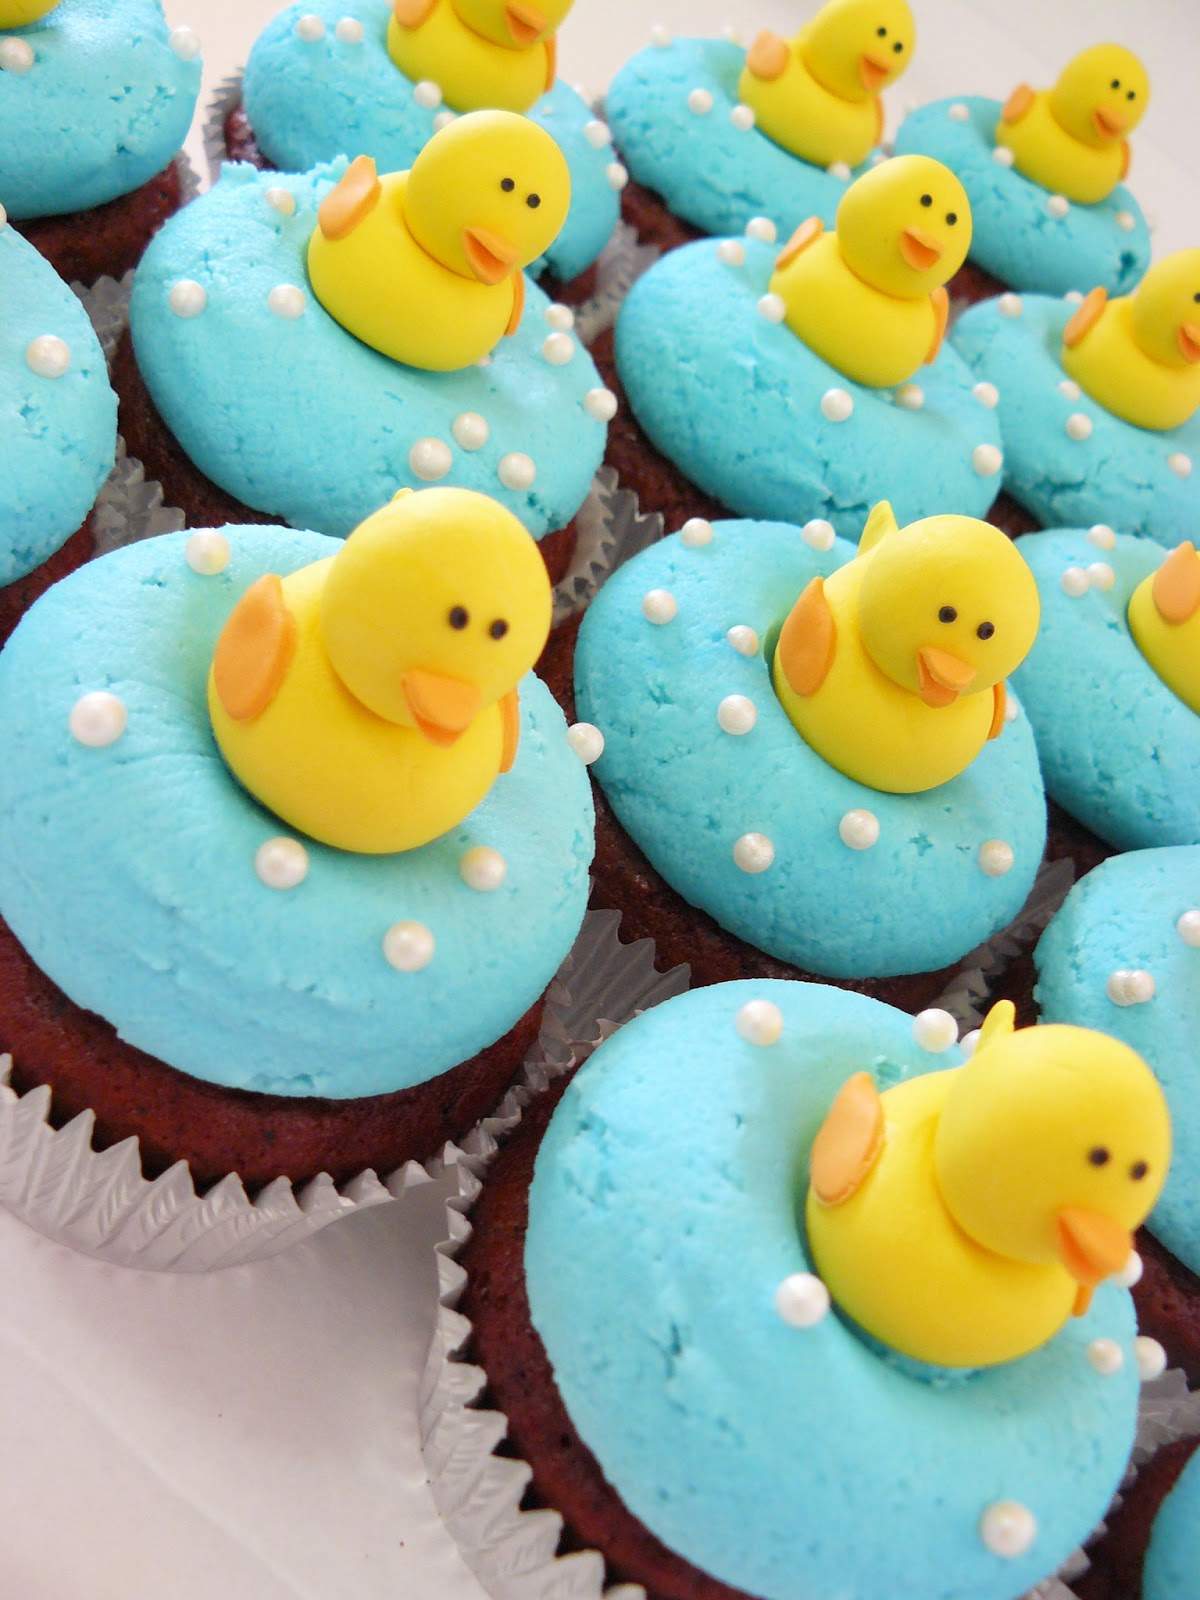 The Cup Cake Taste - Brisbane Cupcakes: Baby Shower Cupcakes